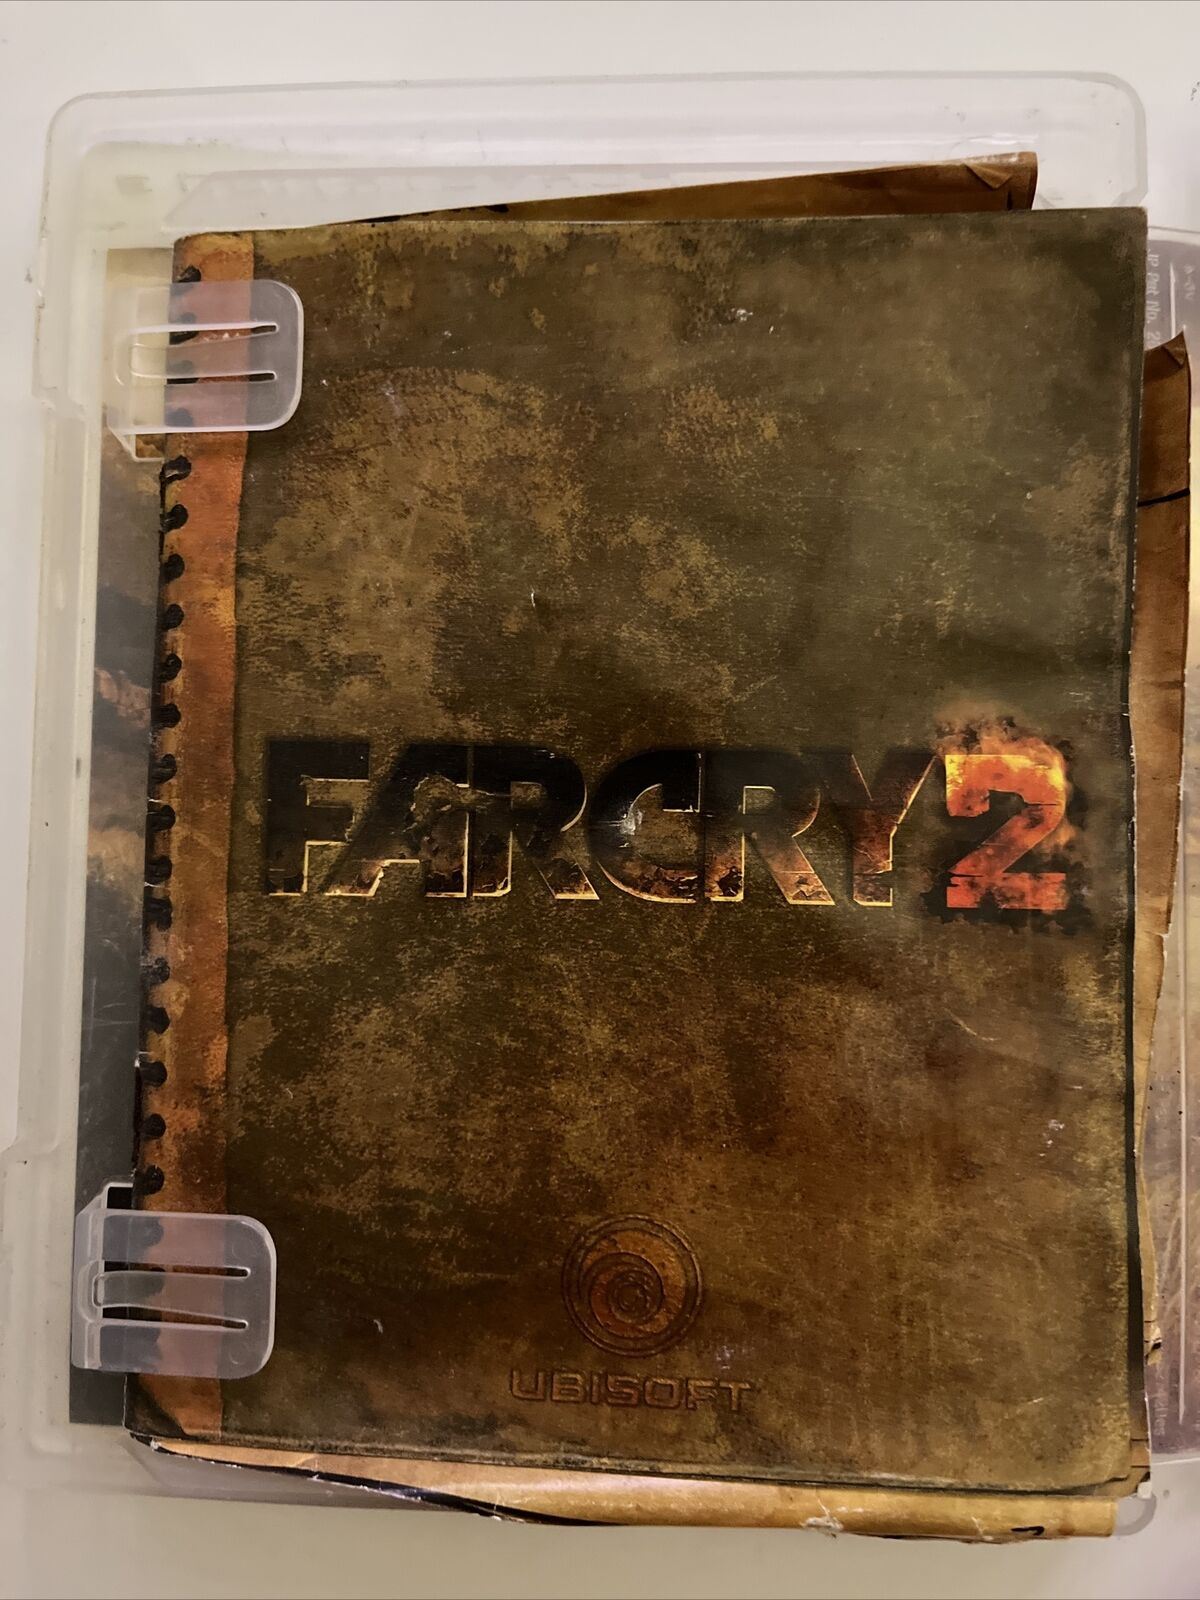 FAR CRY 2 - PlayStation 3 PS3 With Map & Manual